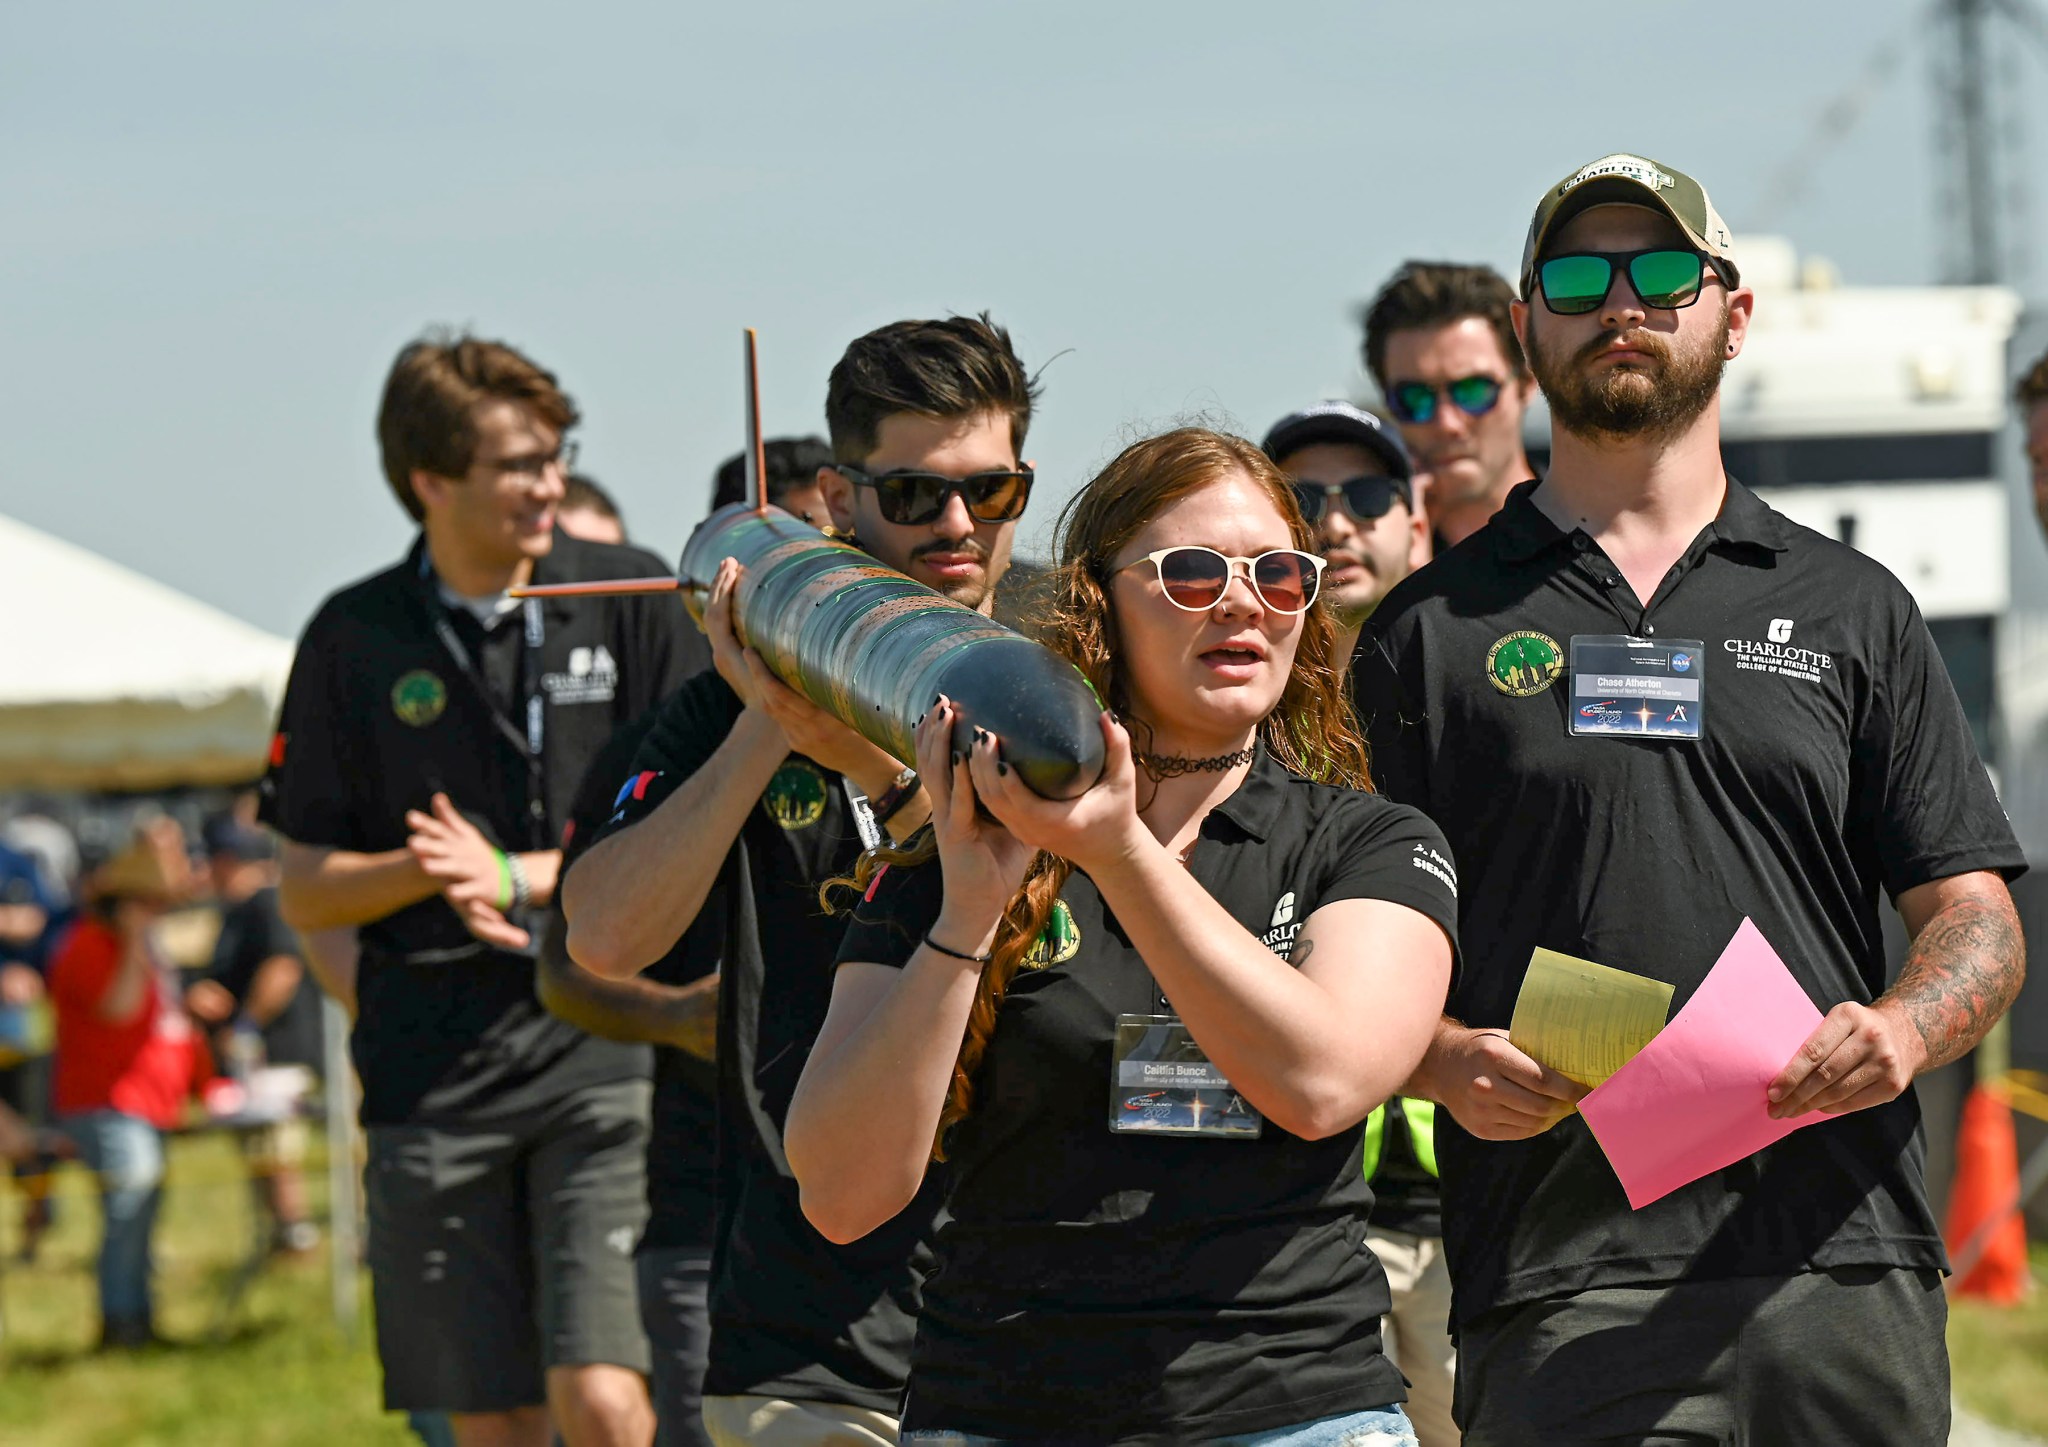 Team members from the University of North Carolina at Charlotte carry their rocket to the launch area near Marshall on April 23. 